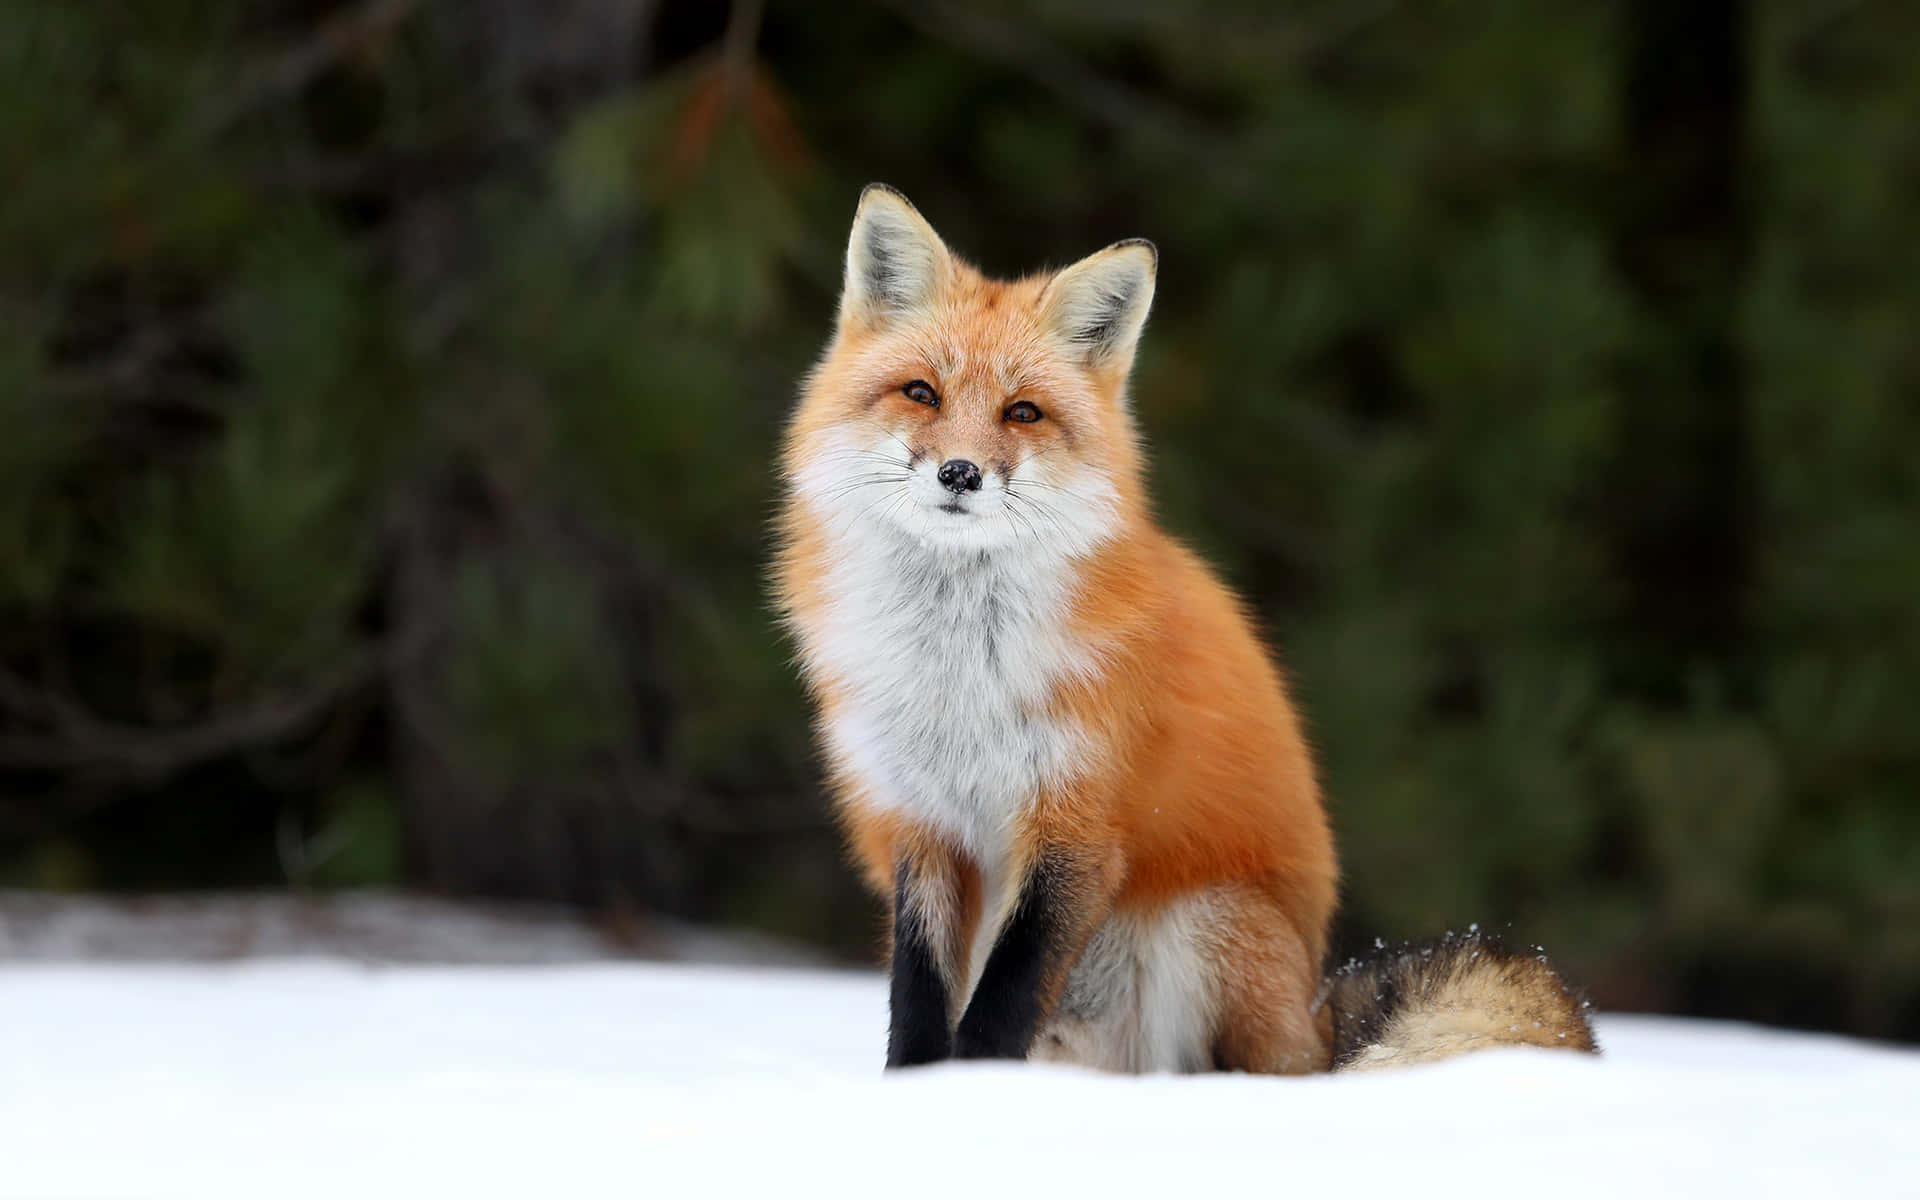 “Renowned for its intelligence, the red fox is one of nature’s most captivating creatures.”